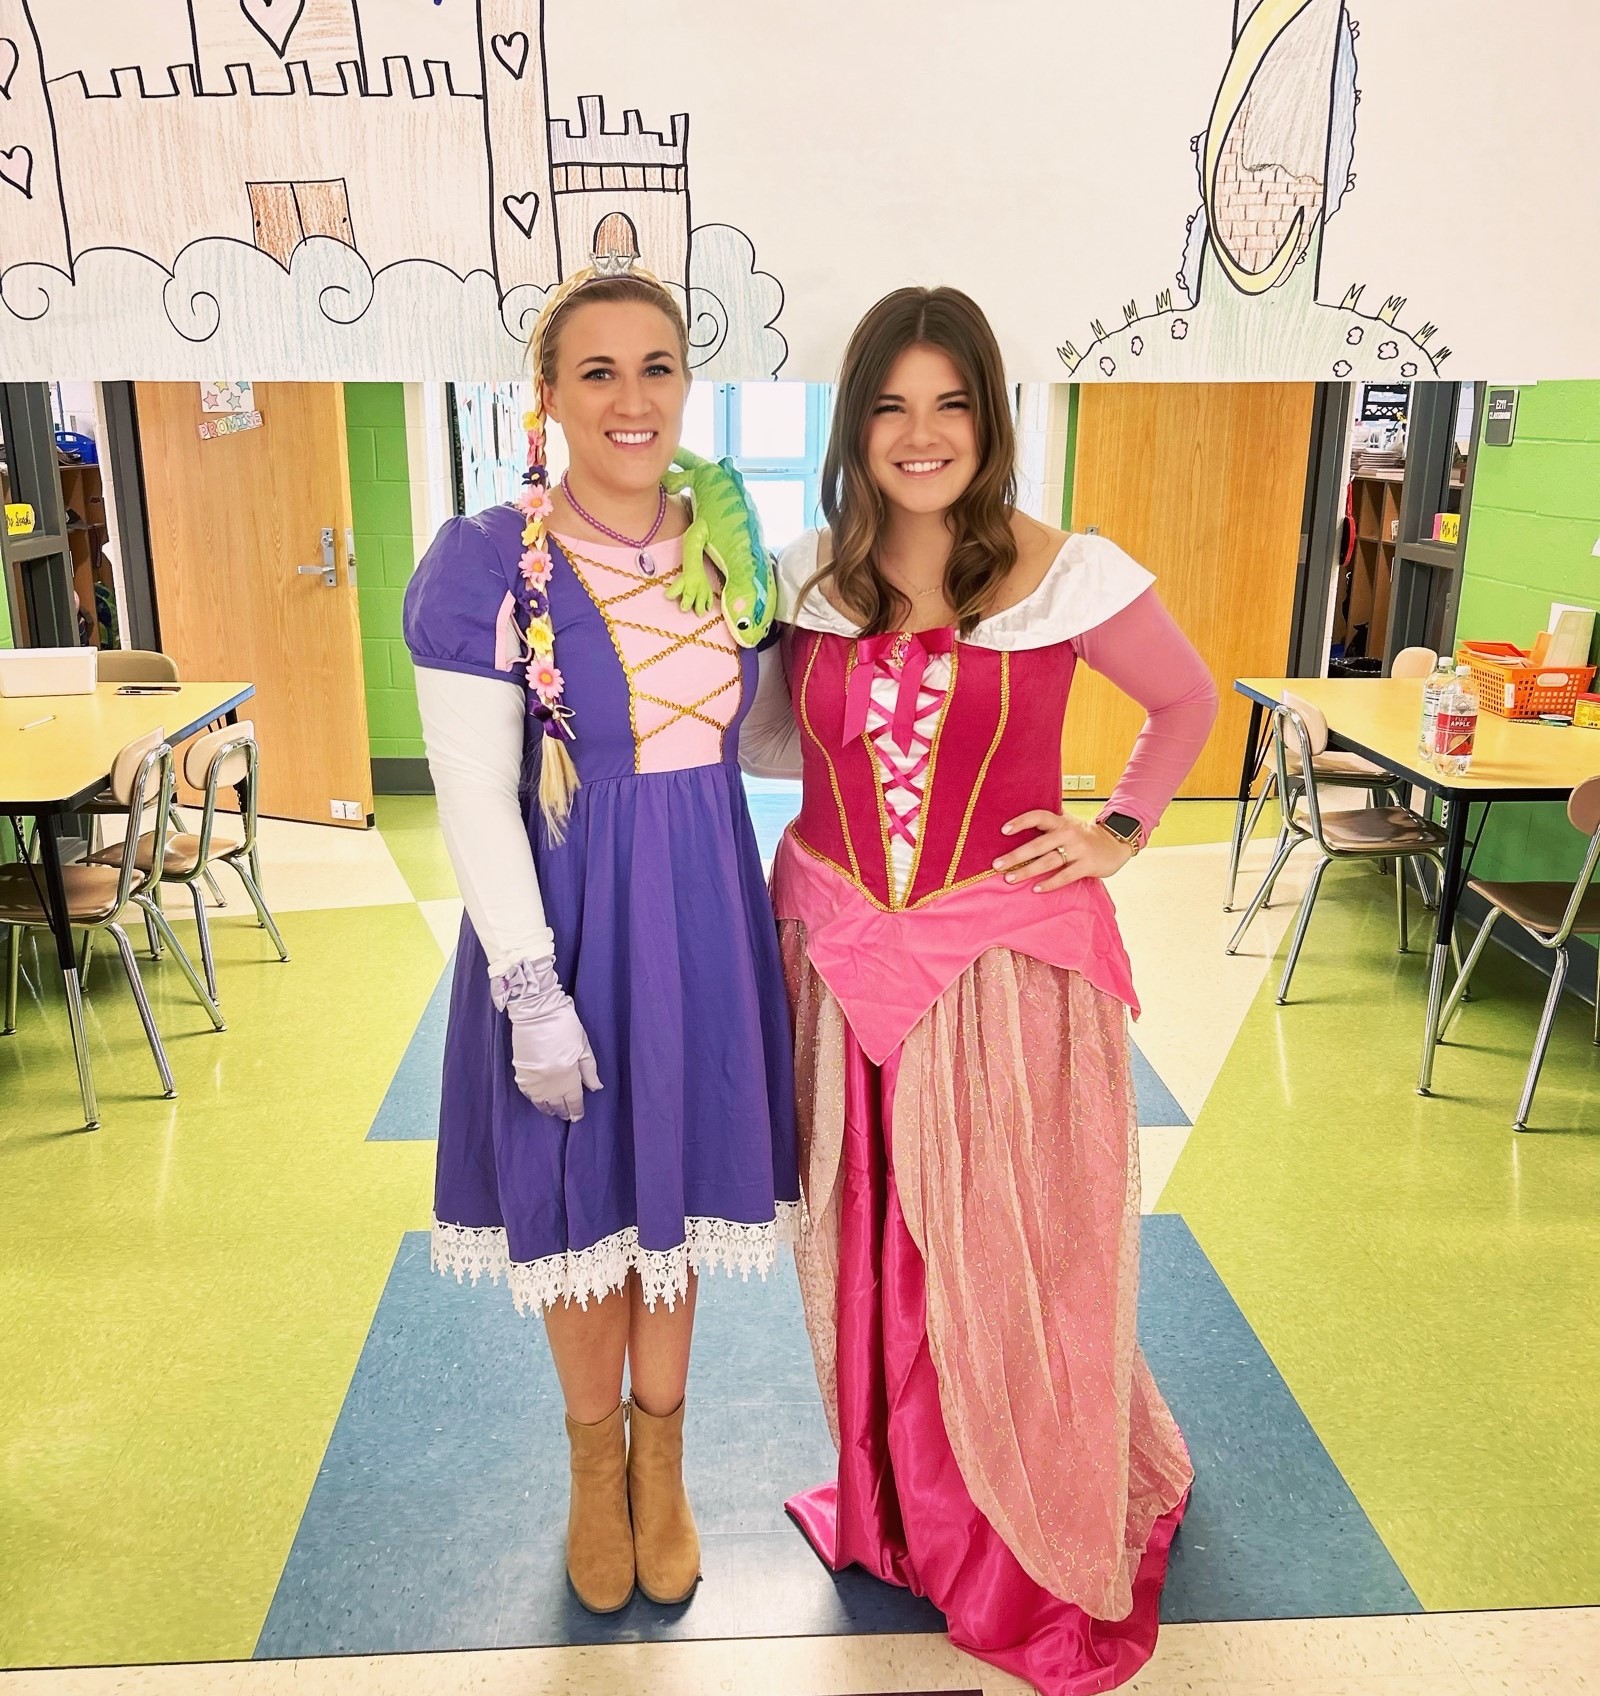 Mrs. Snarski and Mrs. Will dress up for Fairy Tale day in 1st grade